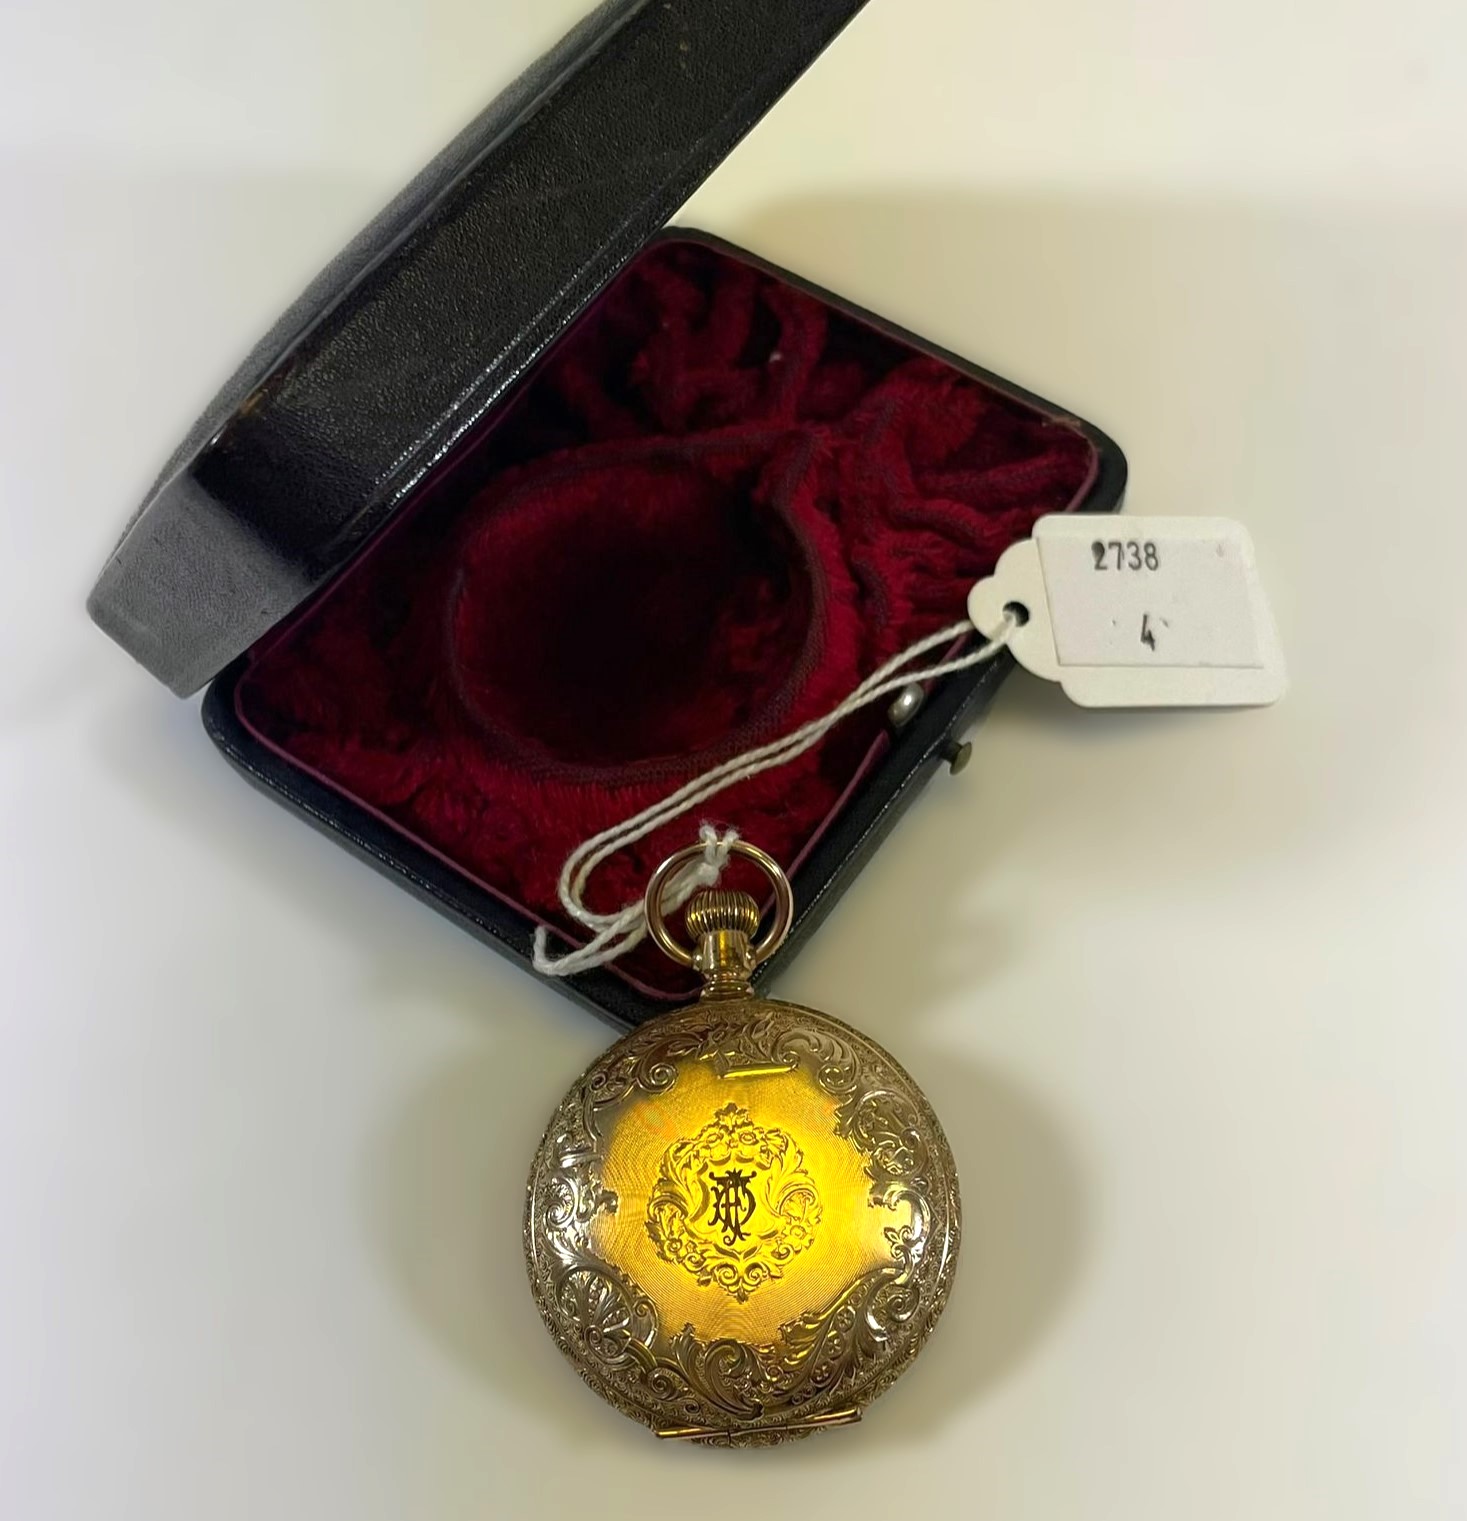 A "14K stamped American made engraved pocket watch  With a white enamel with Roman numerals and